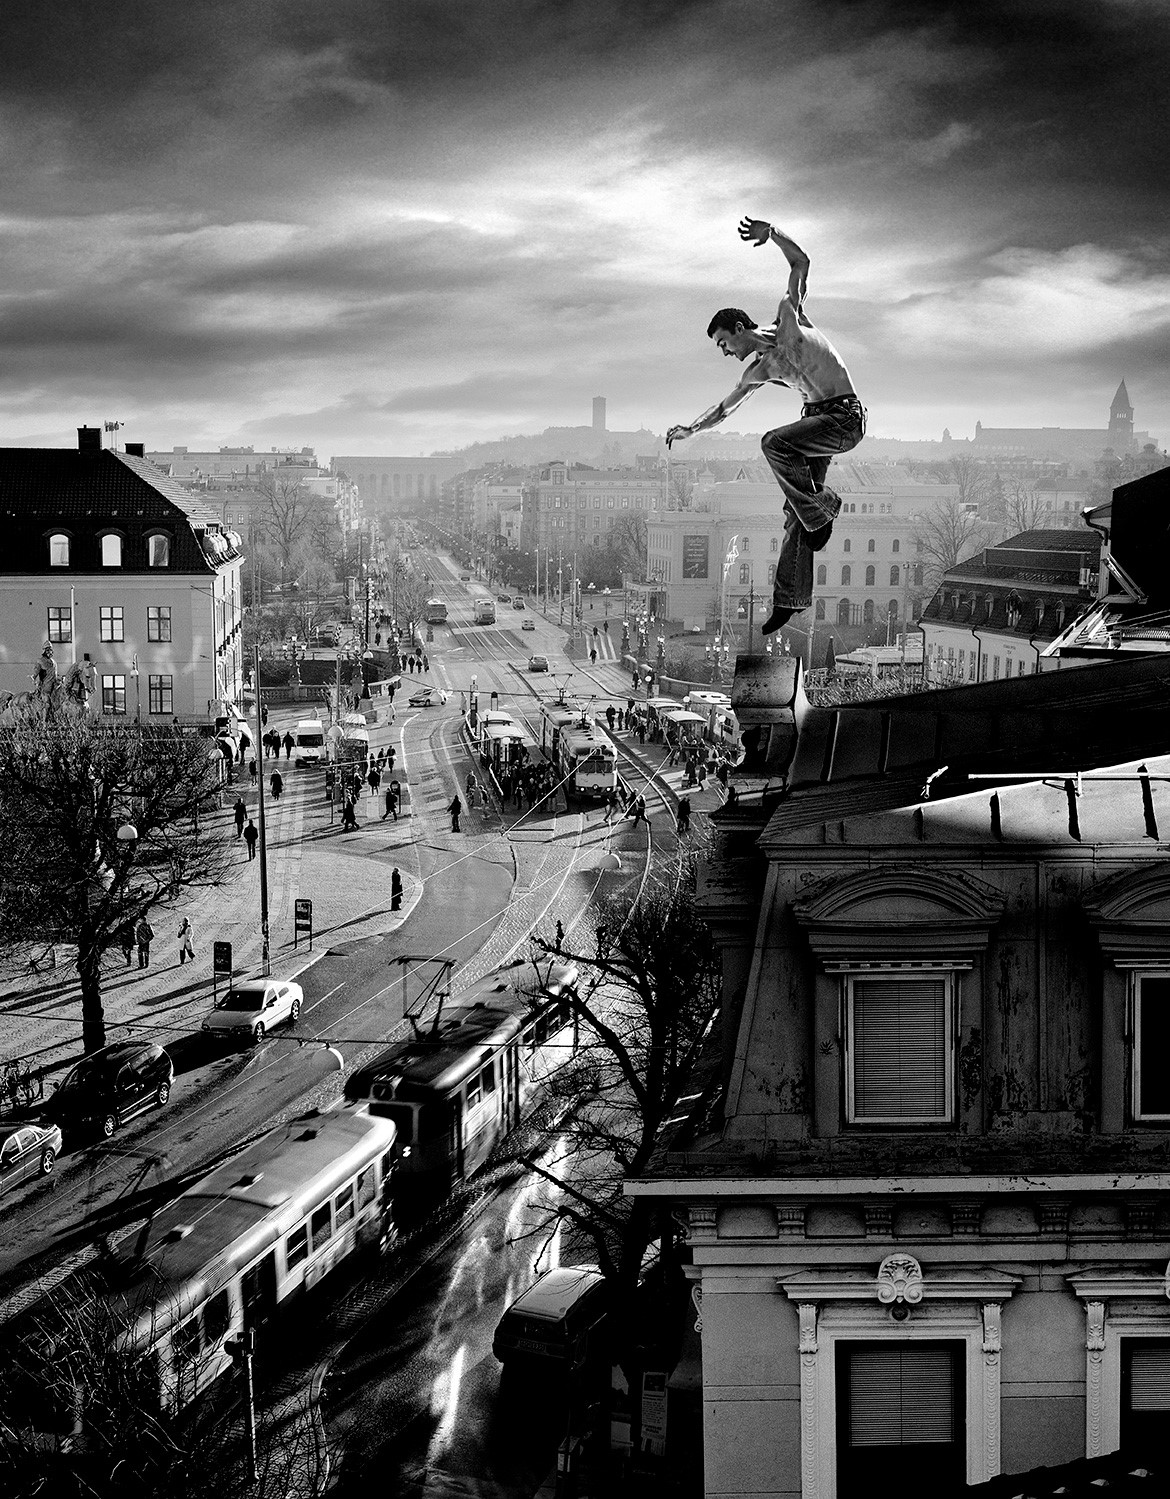 A person is jumping between two buildings against a backdrop of the Avenyn, Gothenburg. In black and white, the individual is captured in the air, just as they leap from one roof to another, creating a sense of motion and danger. The buildings have classical architecture with detailed patterns and structures. Below the buildings, a lively streetscape is visible with cars, trams, and pedestrians moving about. The city silhouette stretches beyond the buildings with various types of houses and trees visible; it appears to be a busy urban environment. The sky is filled with clouds that are backlit, producing an unearthly glow.